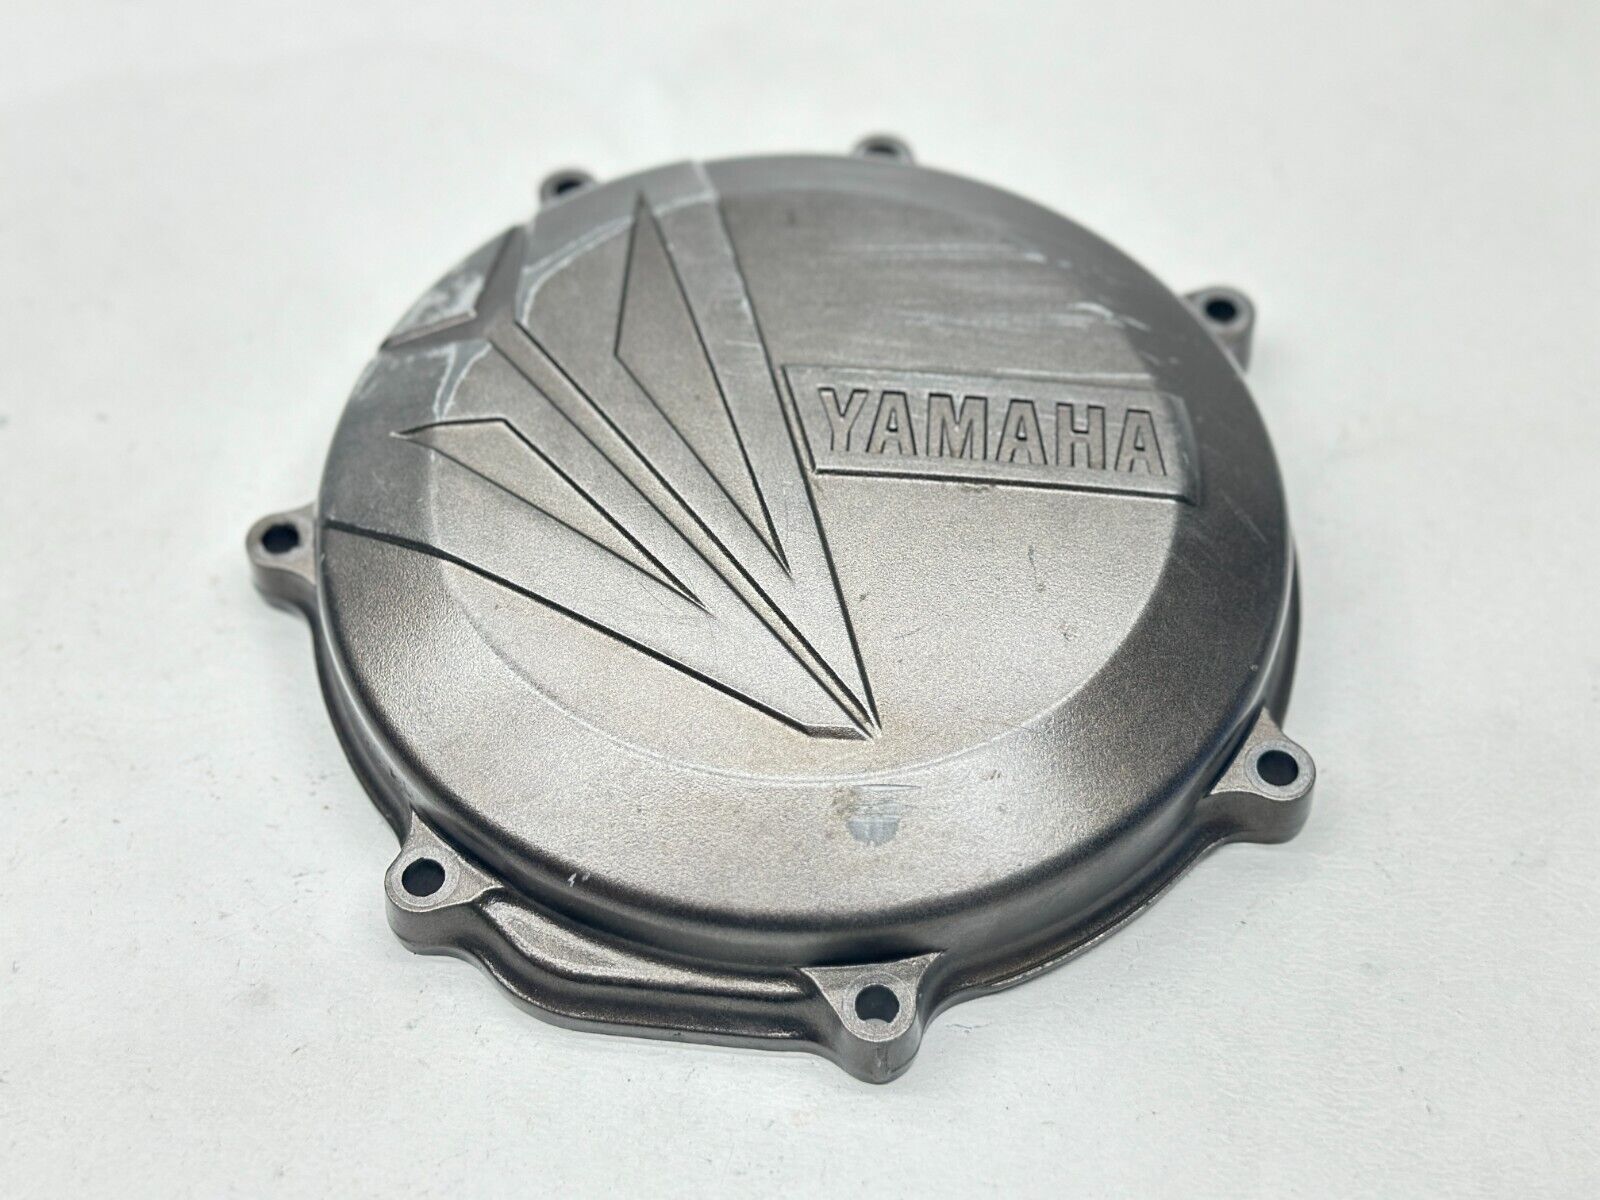 2014 - 2017 Yamaha YZ450F Clutch Cover OEM Engine Outer 450 Case 33D-15415-10-00